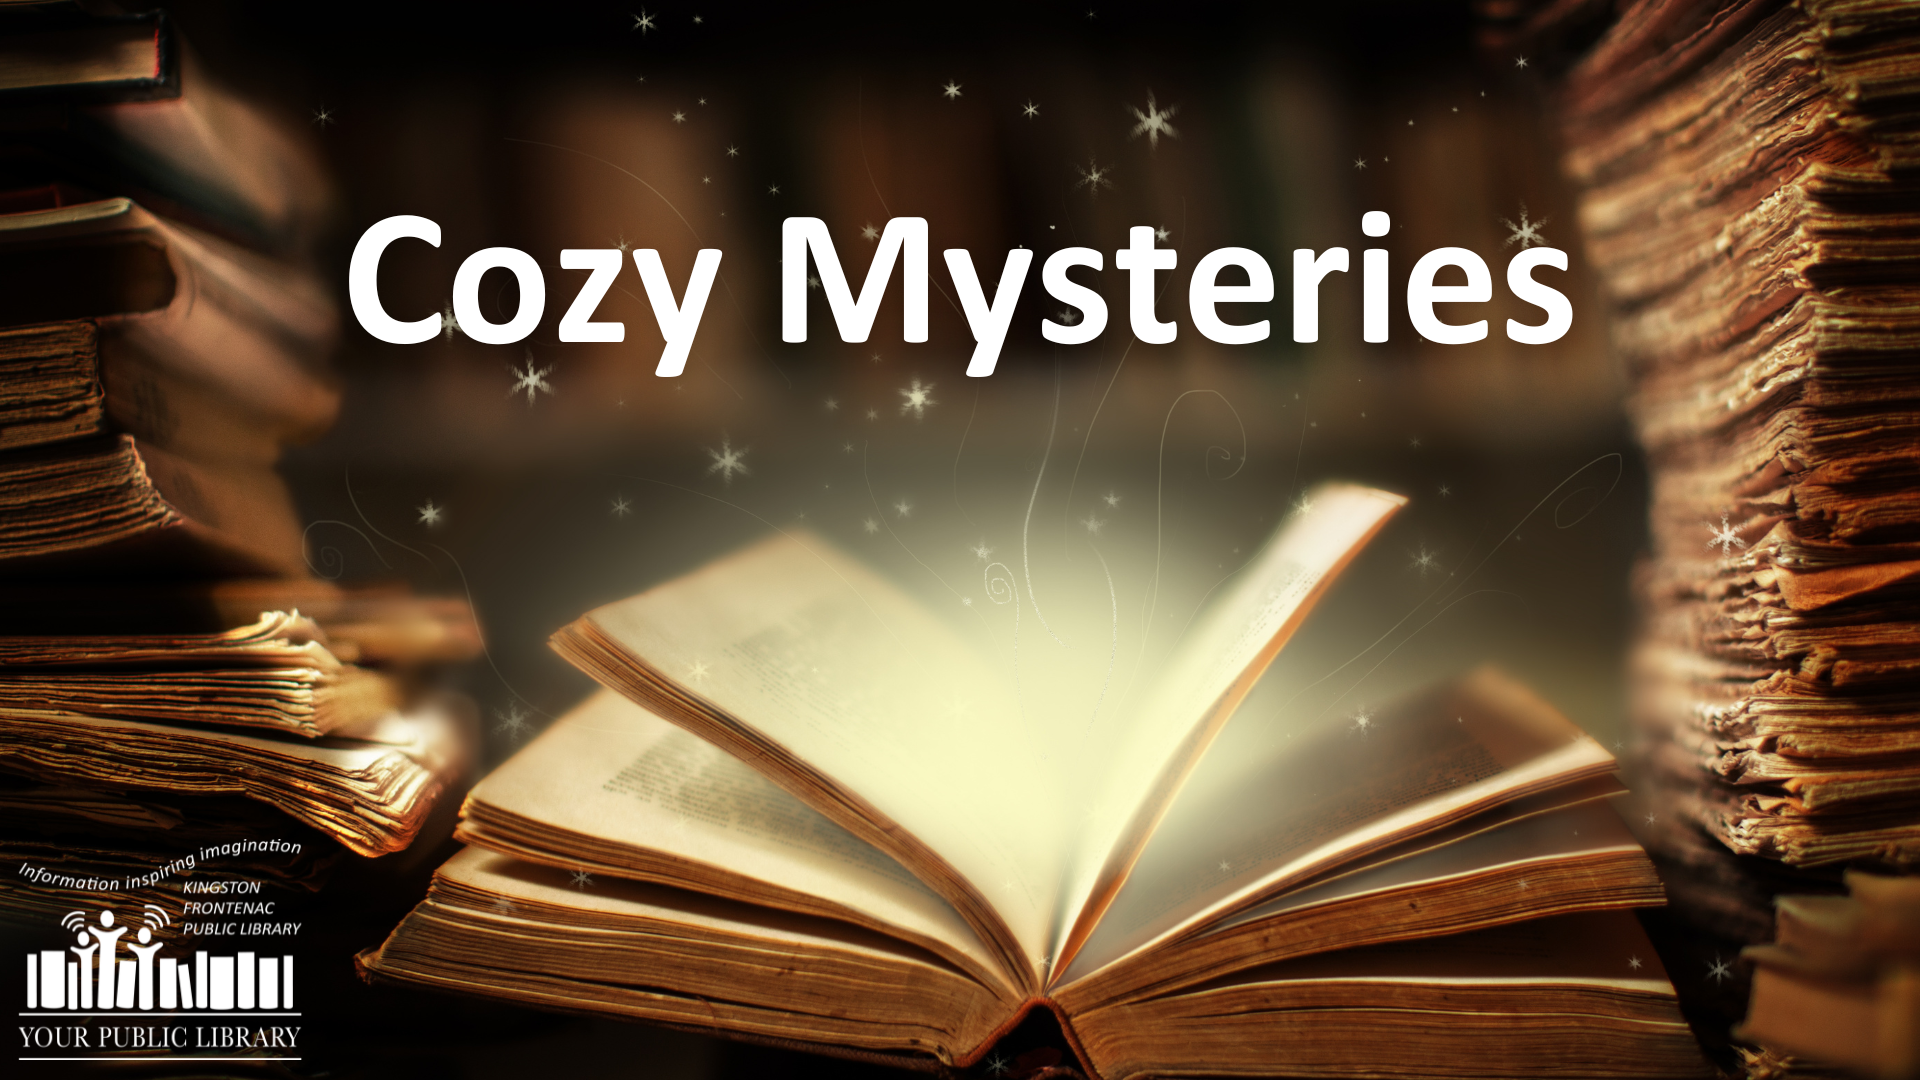 A book opening with sparkles, reading Cozy Mysteries.